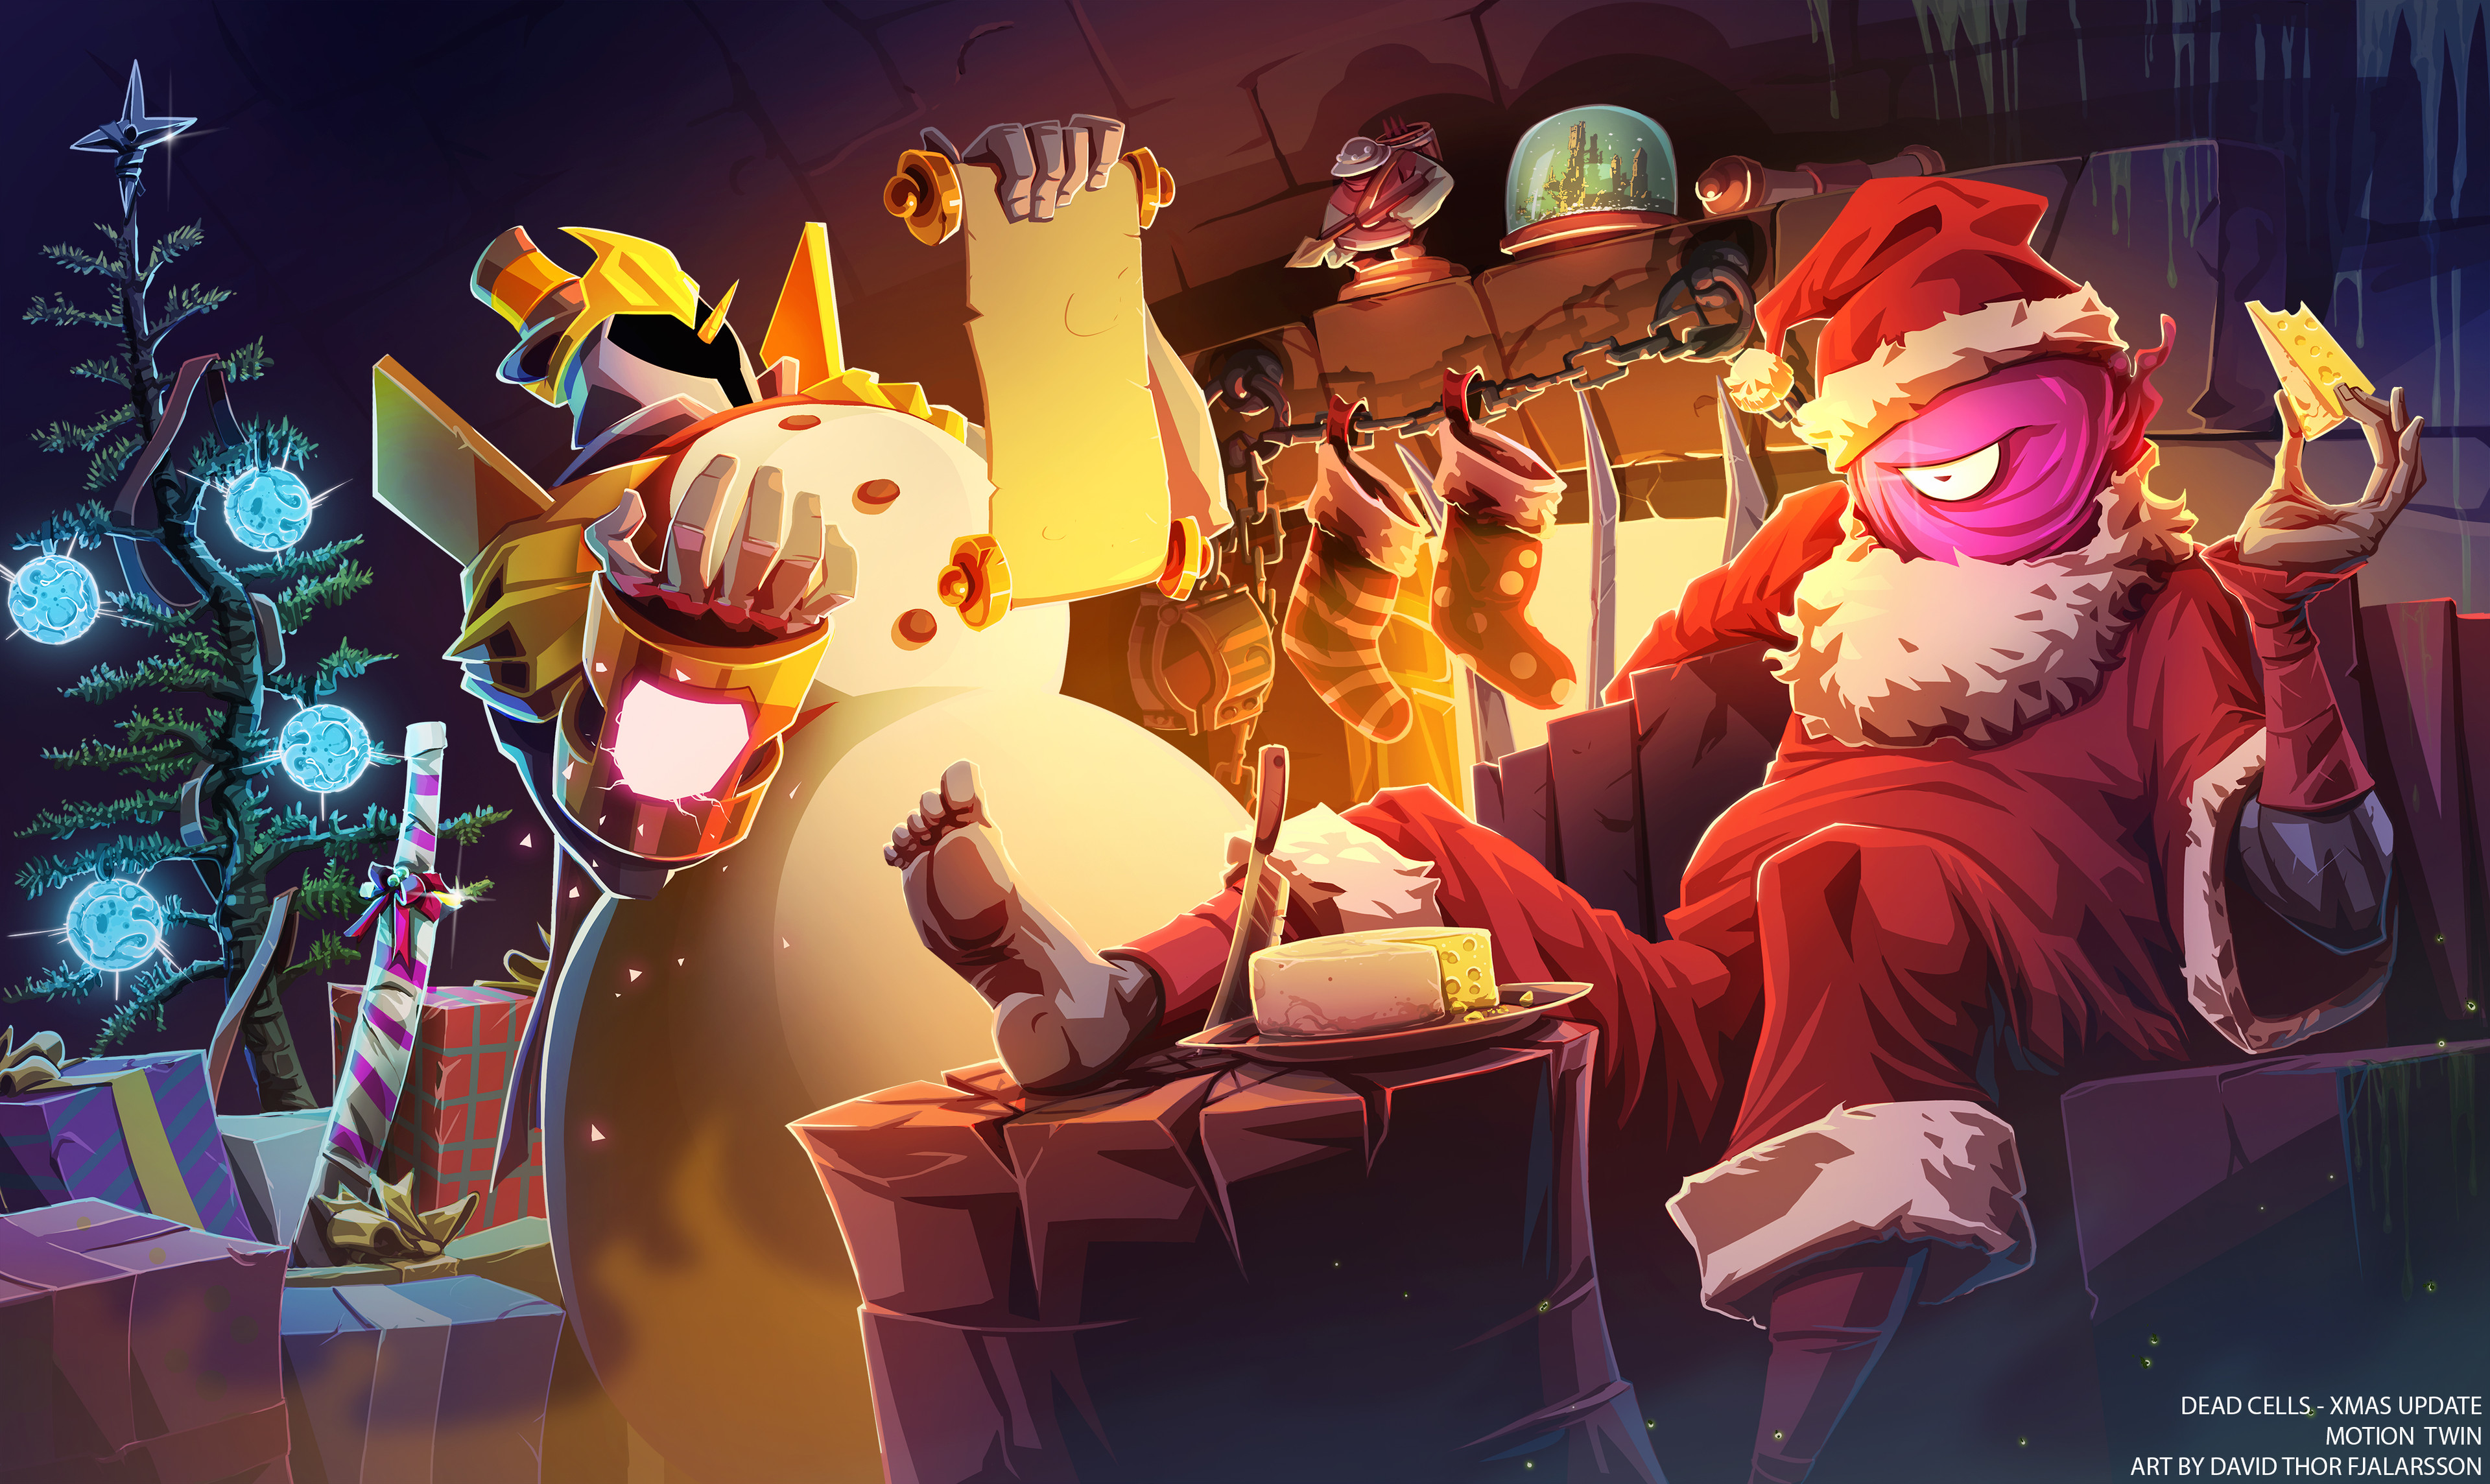 HD desktop wallpaper featuring characters from Dead Cells with a festive holiday theme for a game background.